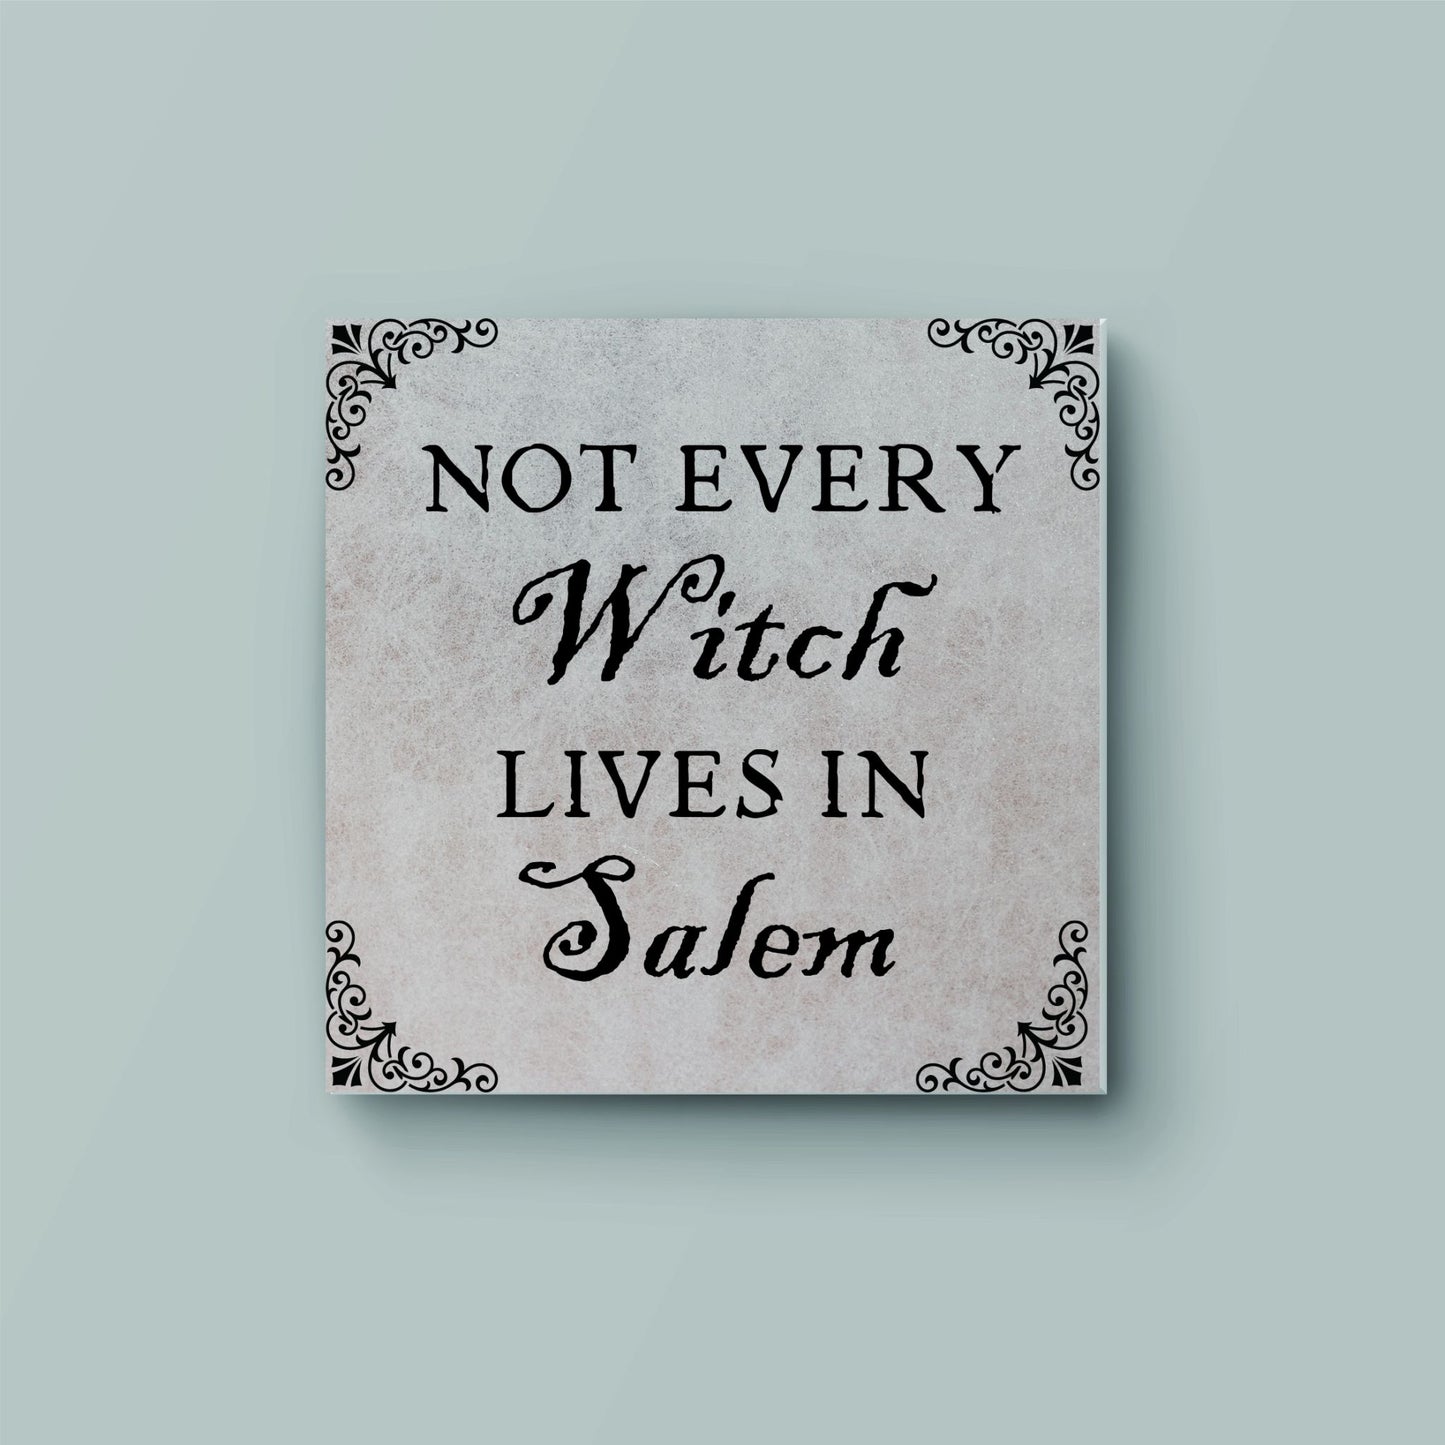 Samhain Salem Witchy Wall Art Spooky Halloween Décor Witchcraft and Pagan Inspired Harvest Festival Wall Hanging Wiccan Gift